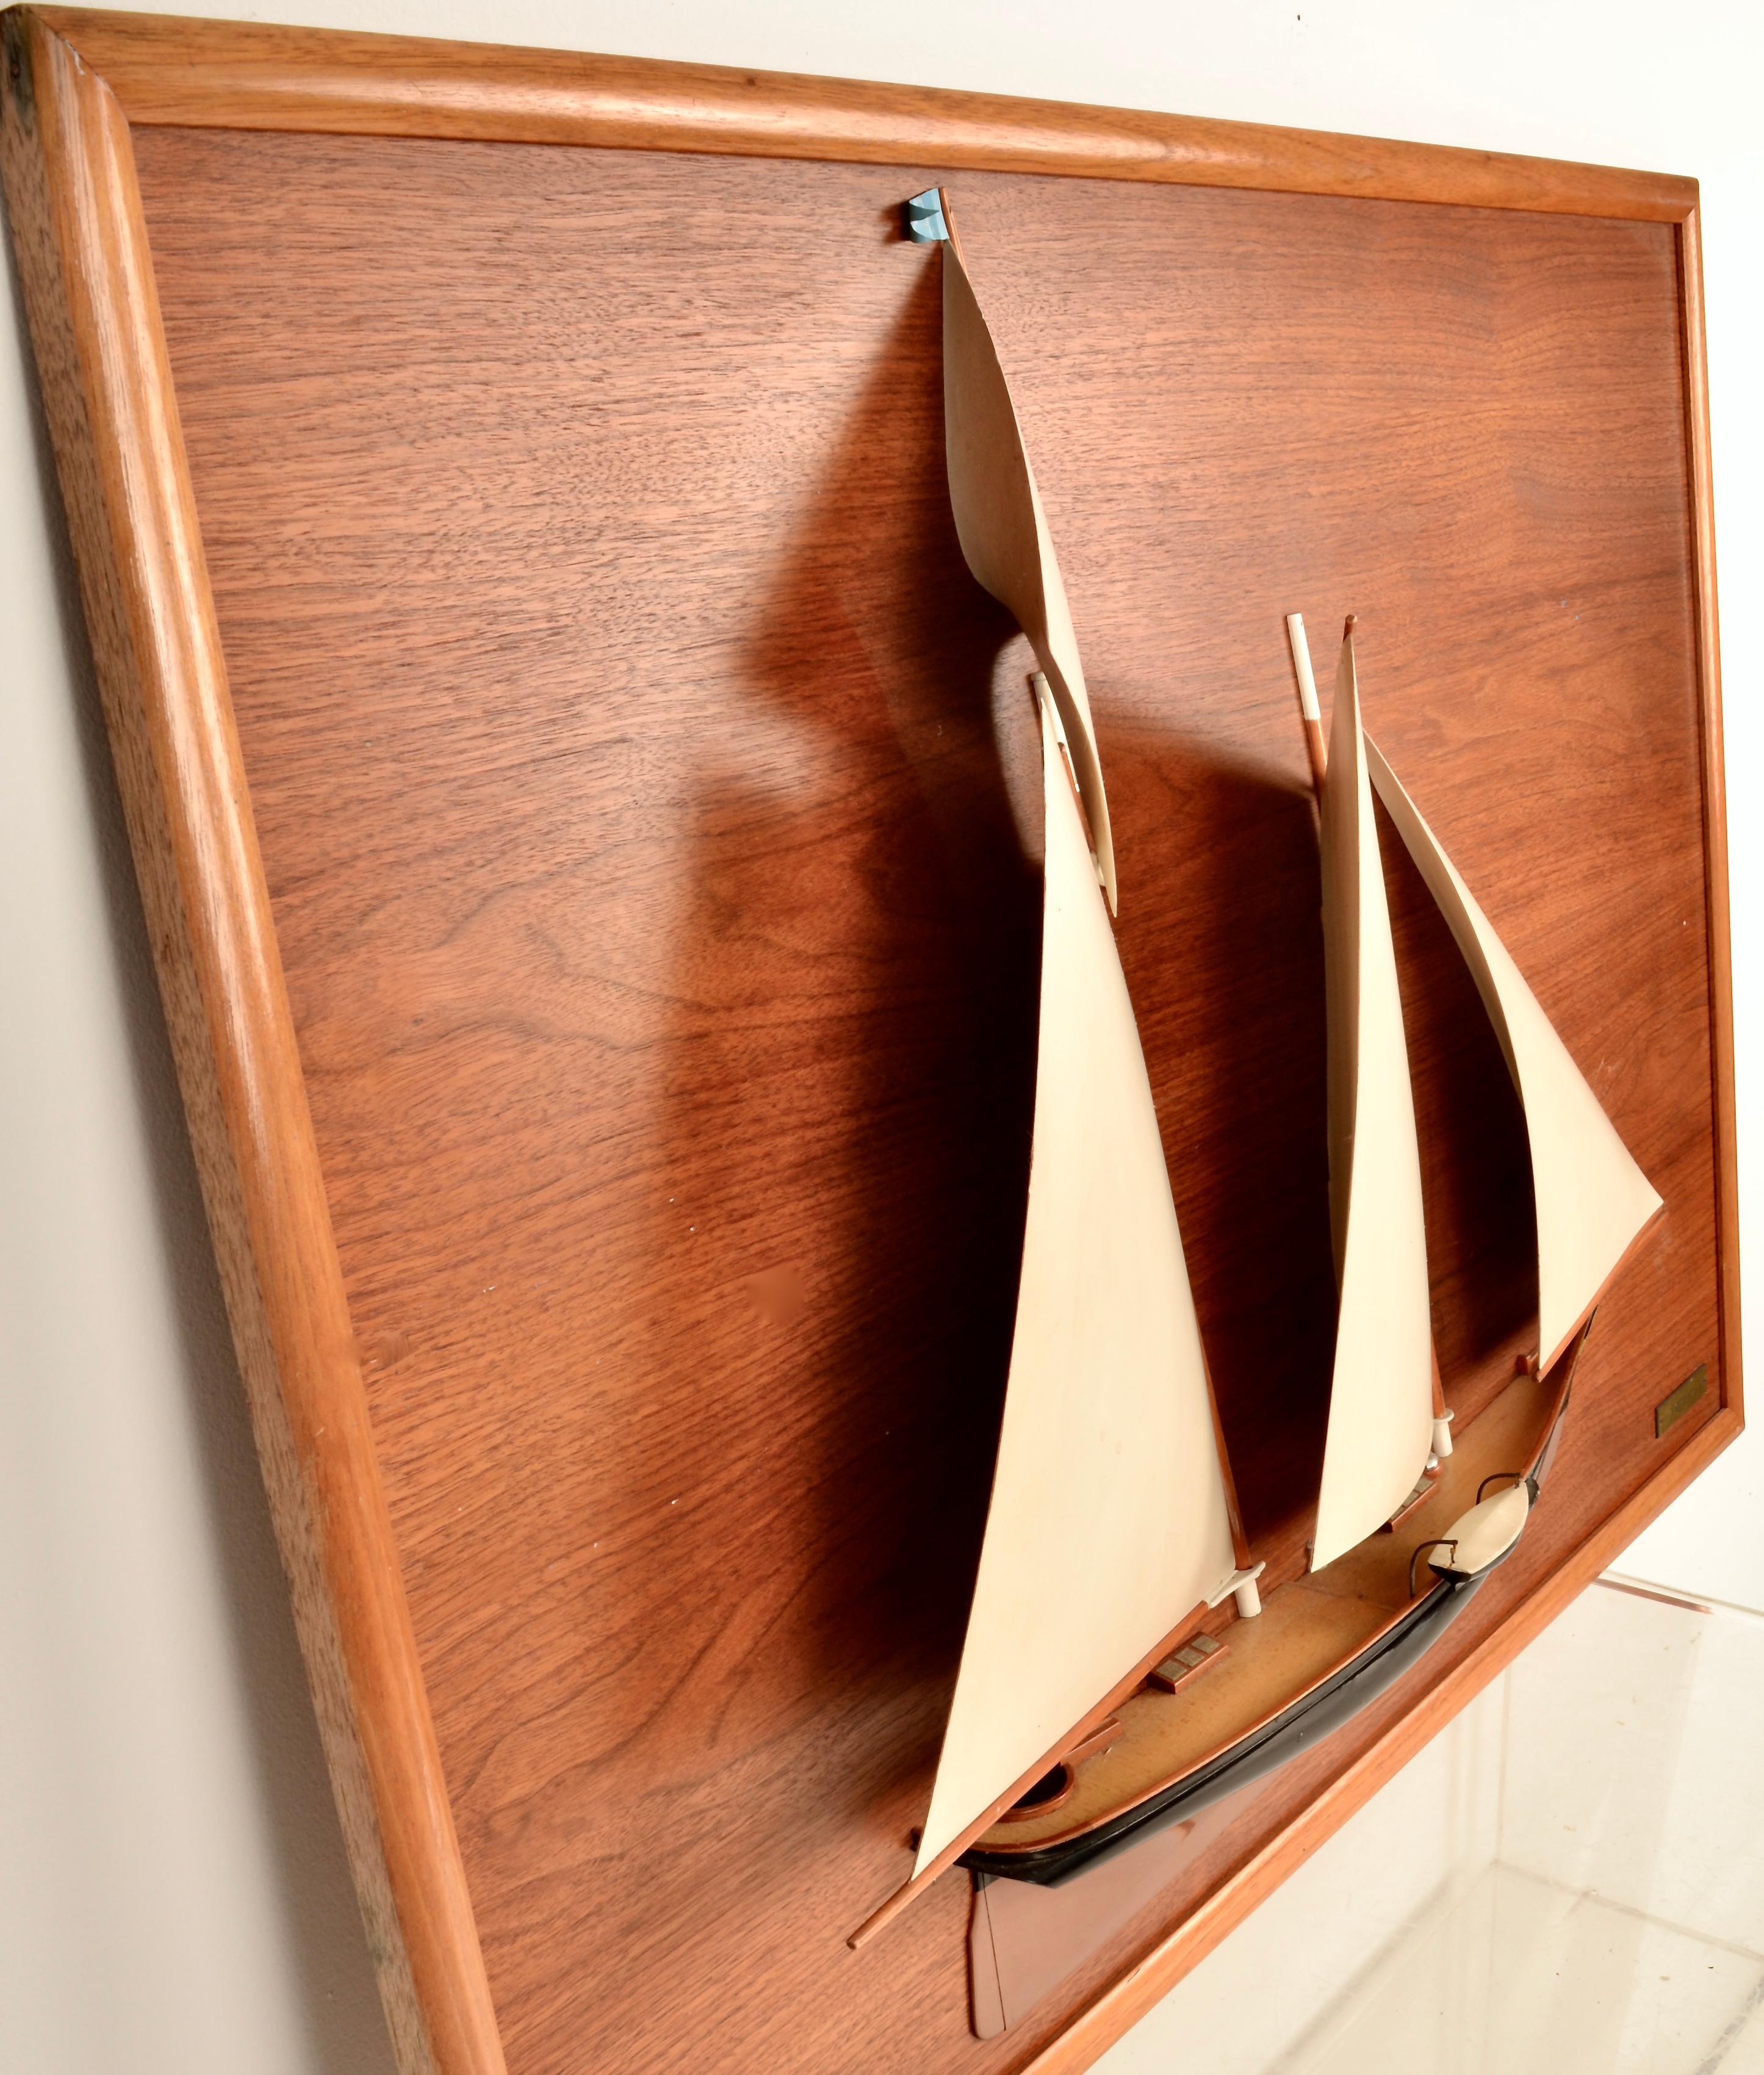 Crafted by Don Peterson, Larchmont, NY circa 1971, an outstanding model of the famed 19th century yacht racing yacht, America. On August 22, 1851, America won the Royal Yacht Squadron's 53-mile 